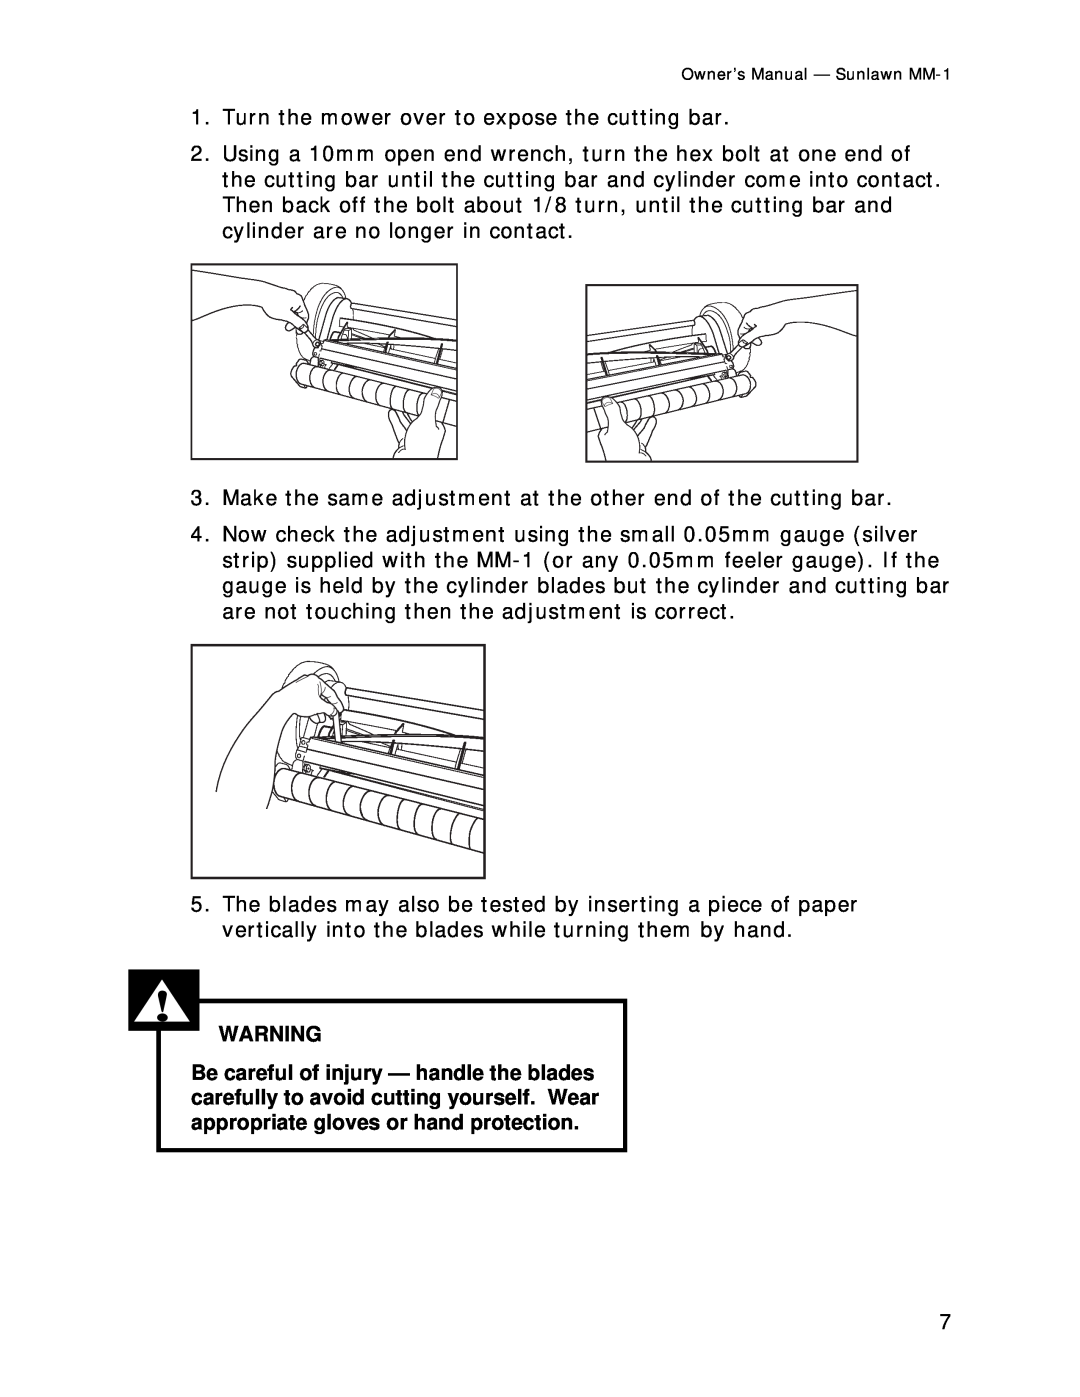 Reel Mowers, Etc MM-1 owner manual Turn the mower over to expose the cutting bar 